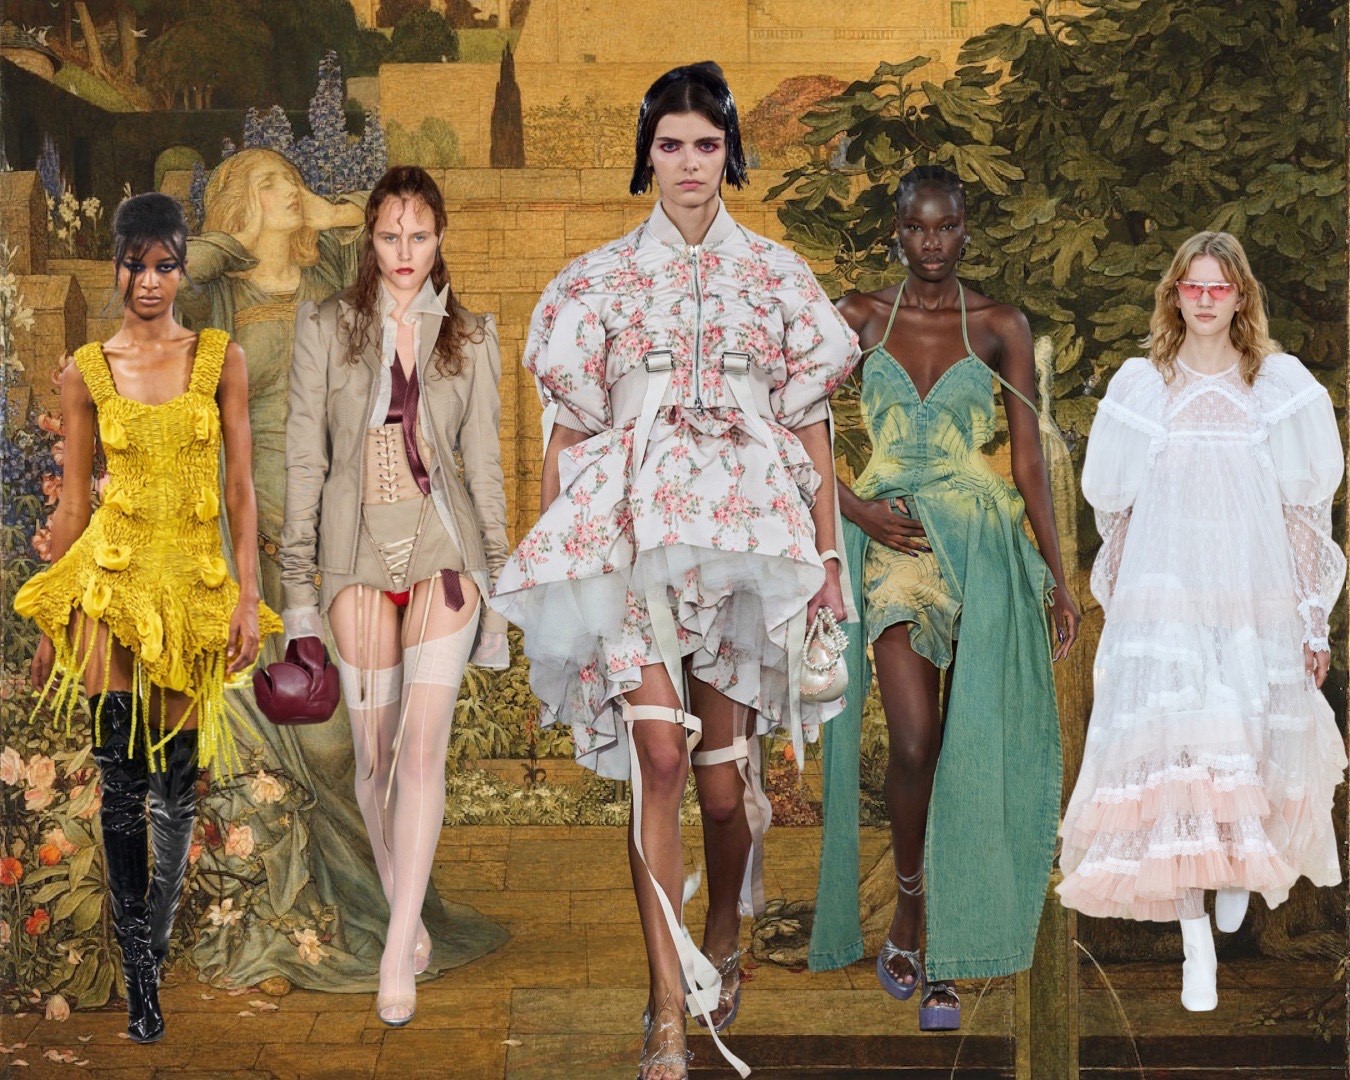 (Feben, Dilara Findikoglu, Simon Rocha, Masha Popova, Bora Aksu ) The 19th century was a revolutionary period in European history and a time of great transformation— and so is 2023. The 19th century was about silhouette, and designers were experimental this season in creating historical references with a modern and contemporary twist.